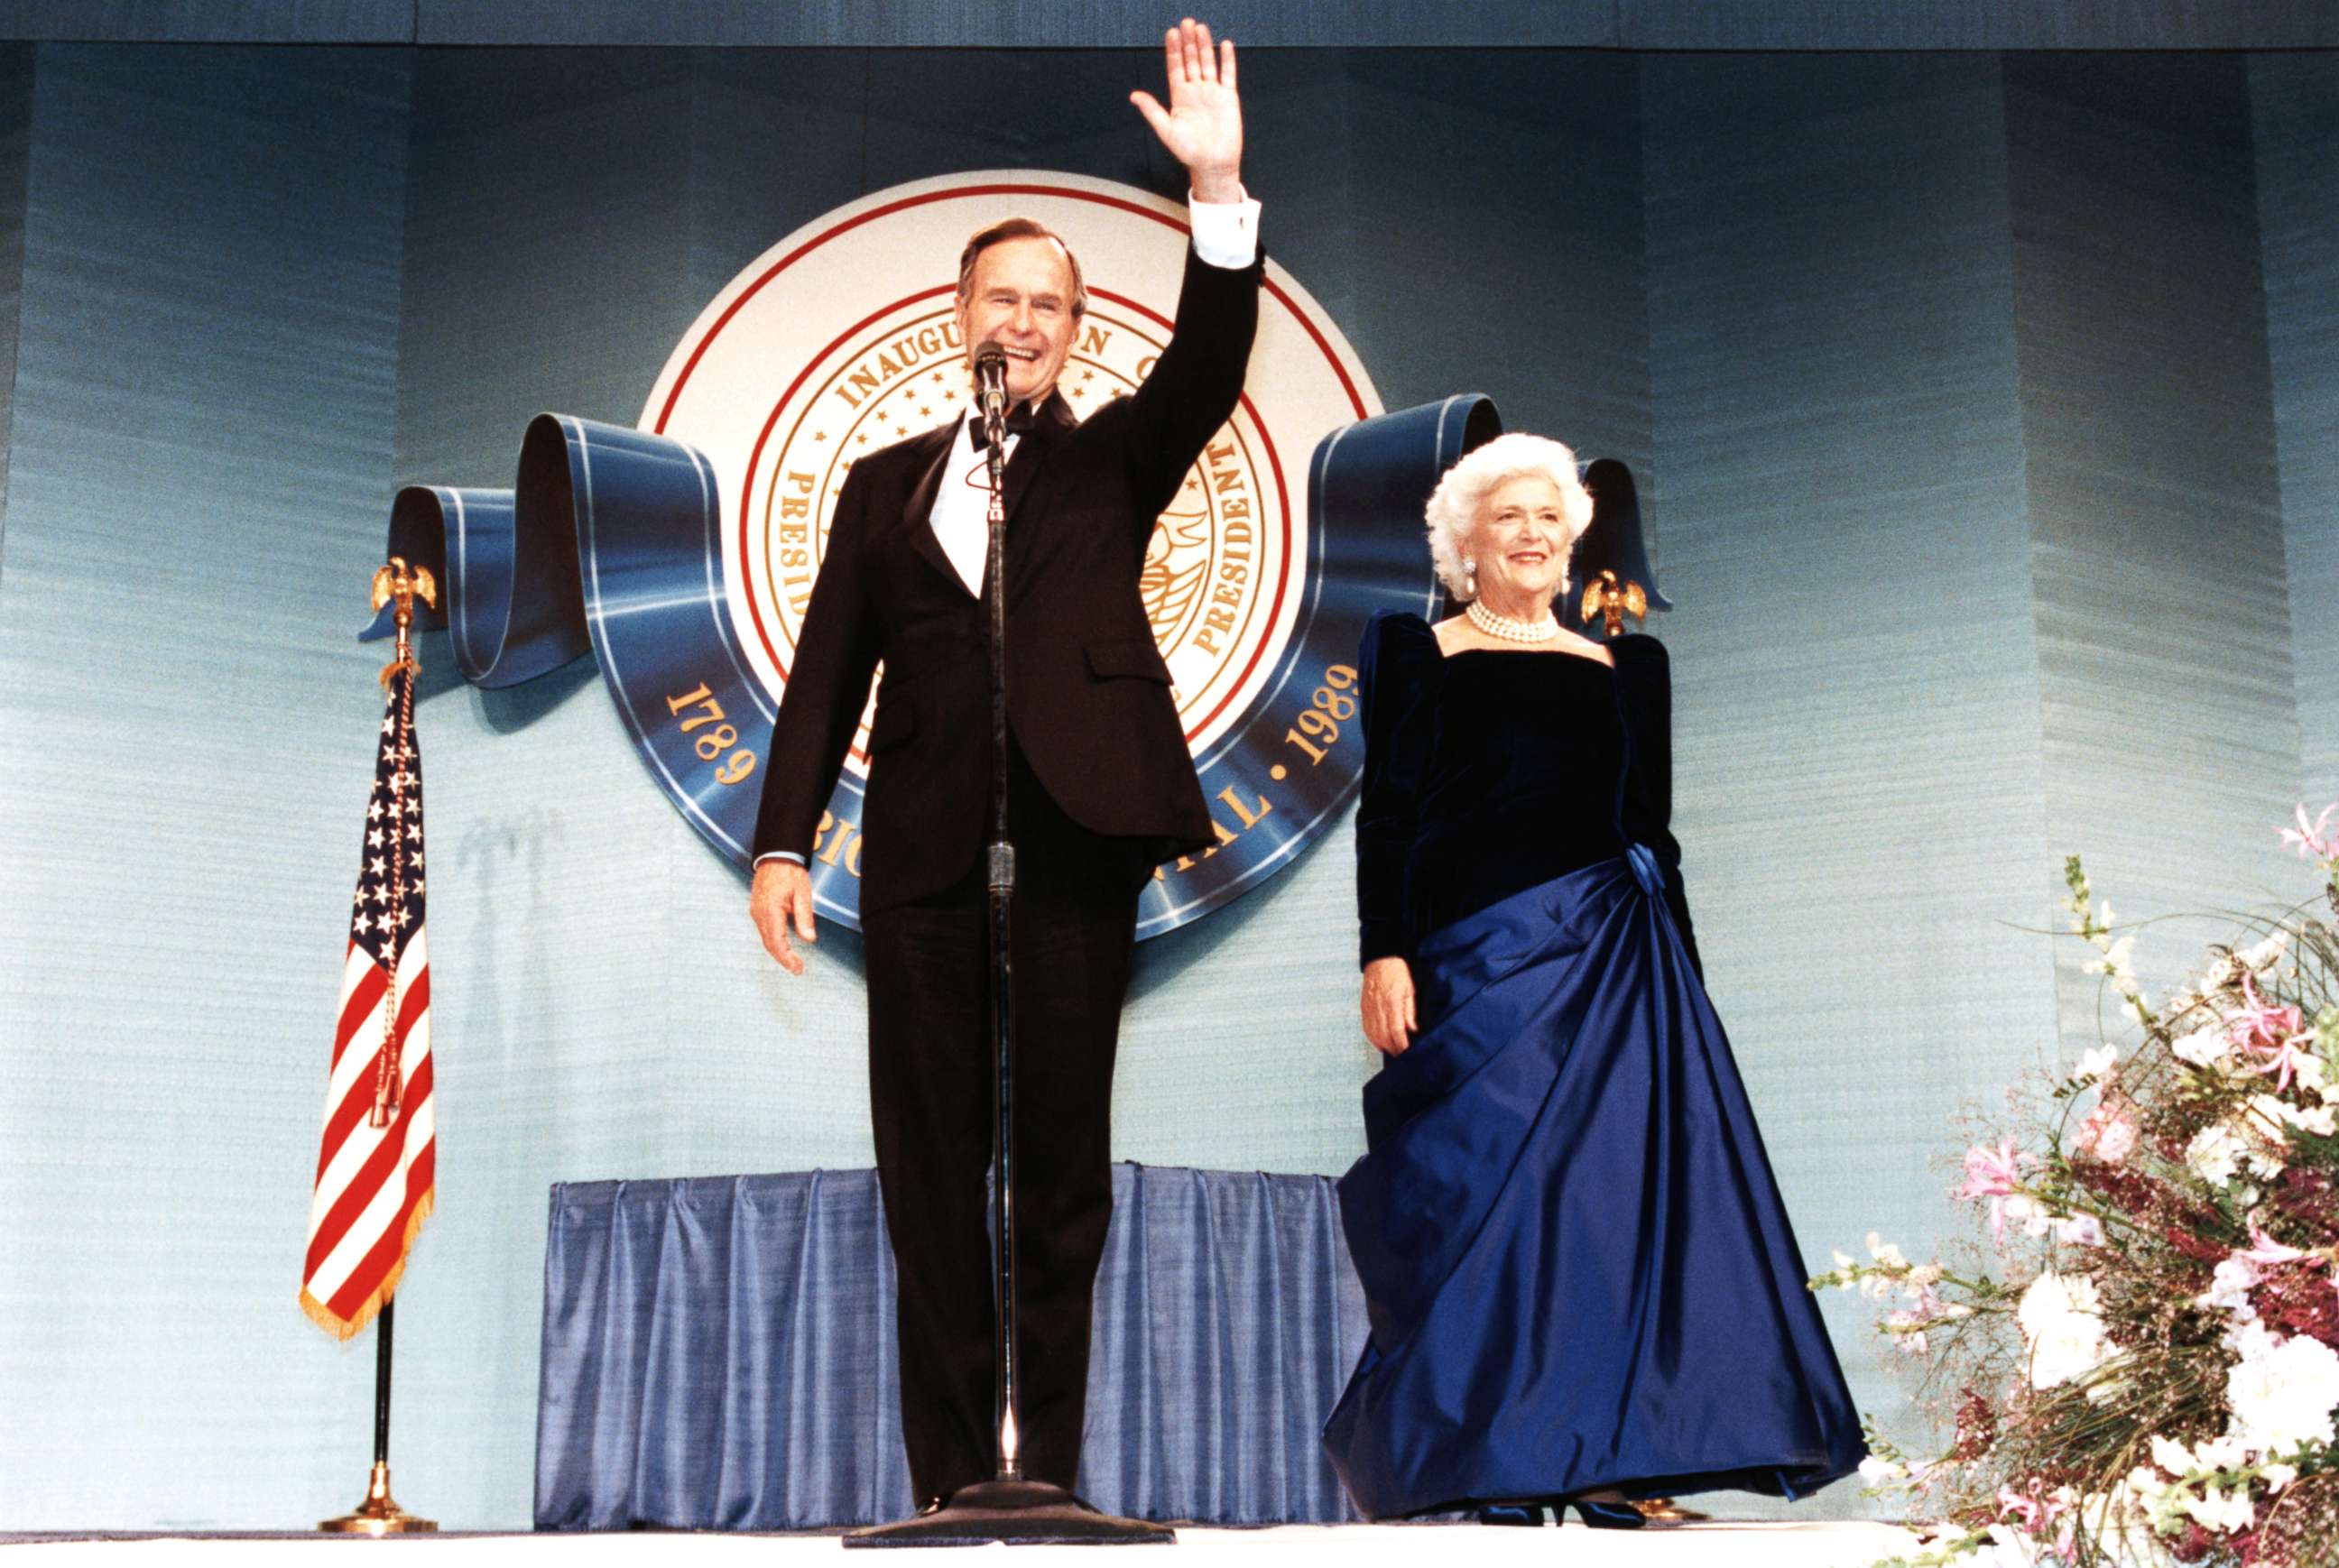 PHOTO: George Bush smiles and waves to participants of his inaugural celebration with his wife Barbara in Washington D.C., Jan. 20, 1989.